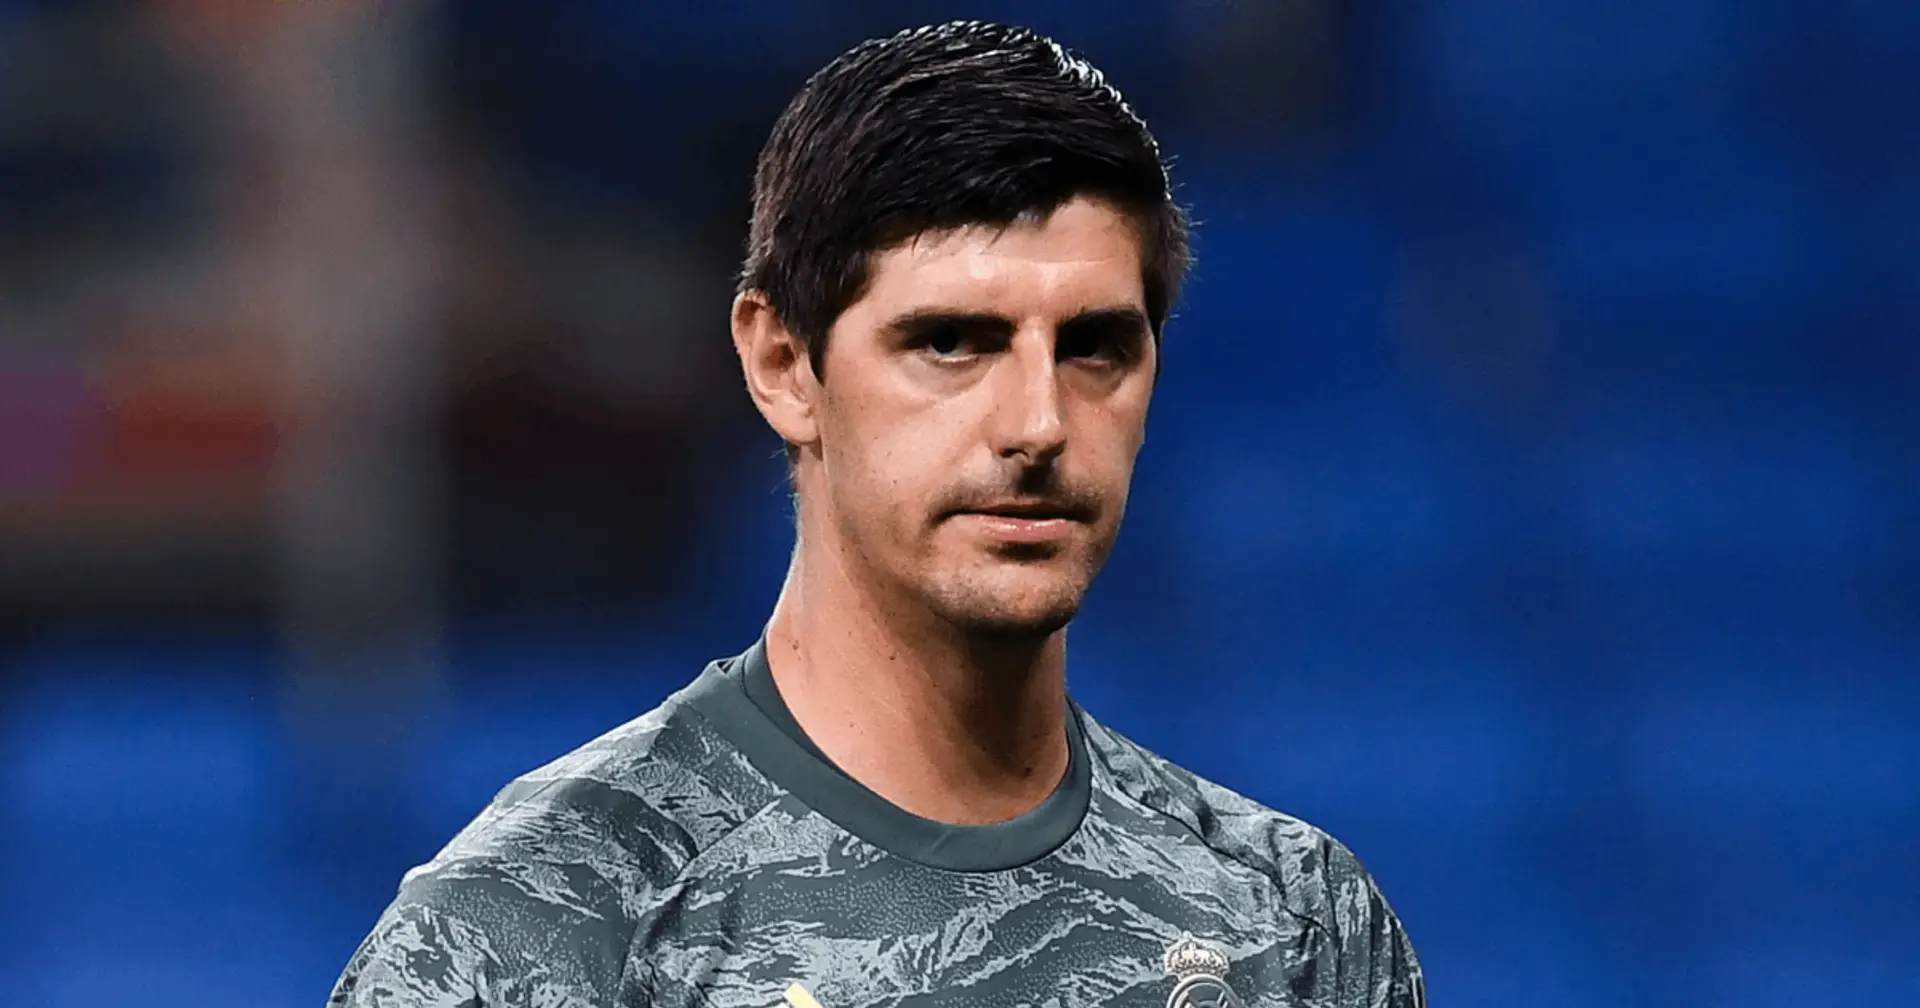 'I survived a tsunami of criticism there': Thibaut Courtois expresses his frustration at being undervalued in Belgium